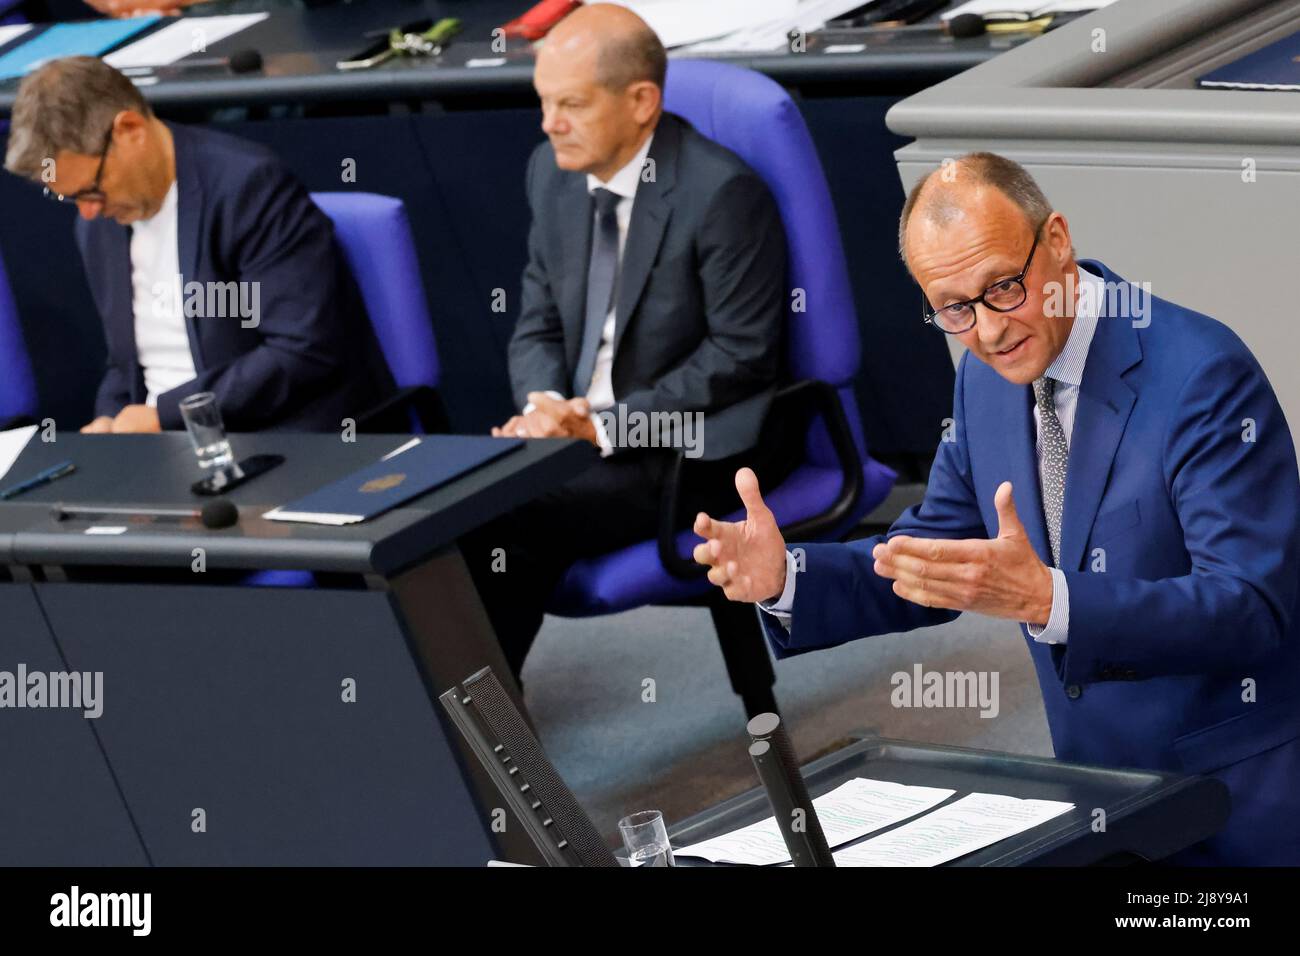 Leader of Germany's Christian Democratic Union (CDU) Friedrich Merz speaks while German Chancellor Olaf Scholz and German Economy and Climate Minister Robert Habeck listen during a session of Germany's lower house of parliament, the Bundestag, in Berlin, Germany, May 19, 2022. REUTERS/Hannibal Hanschke Stock Photo